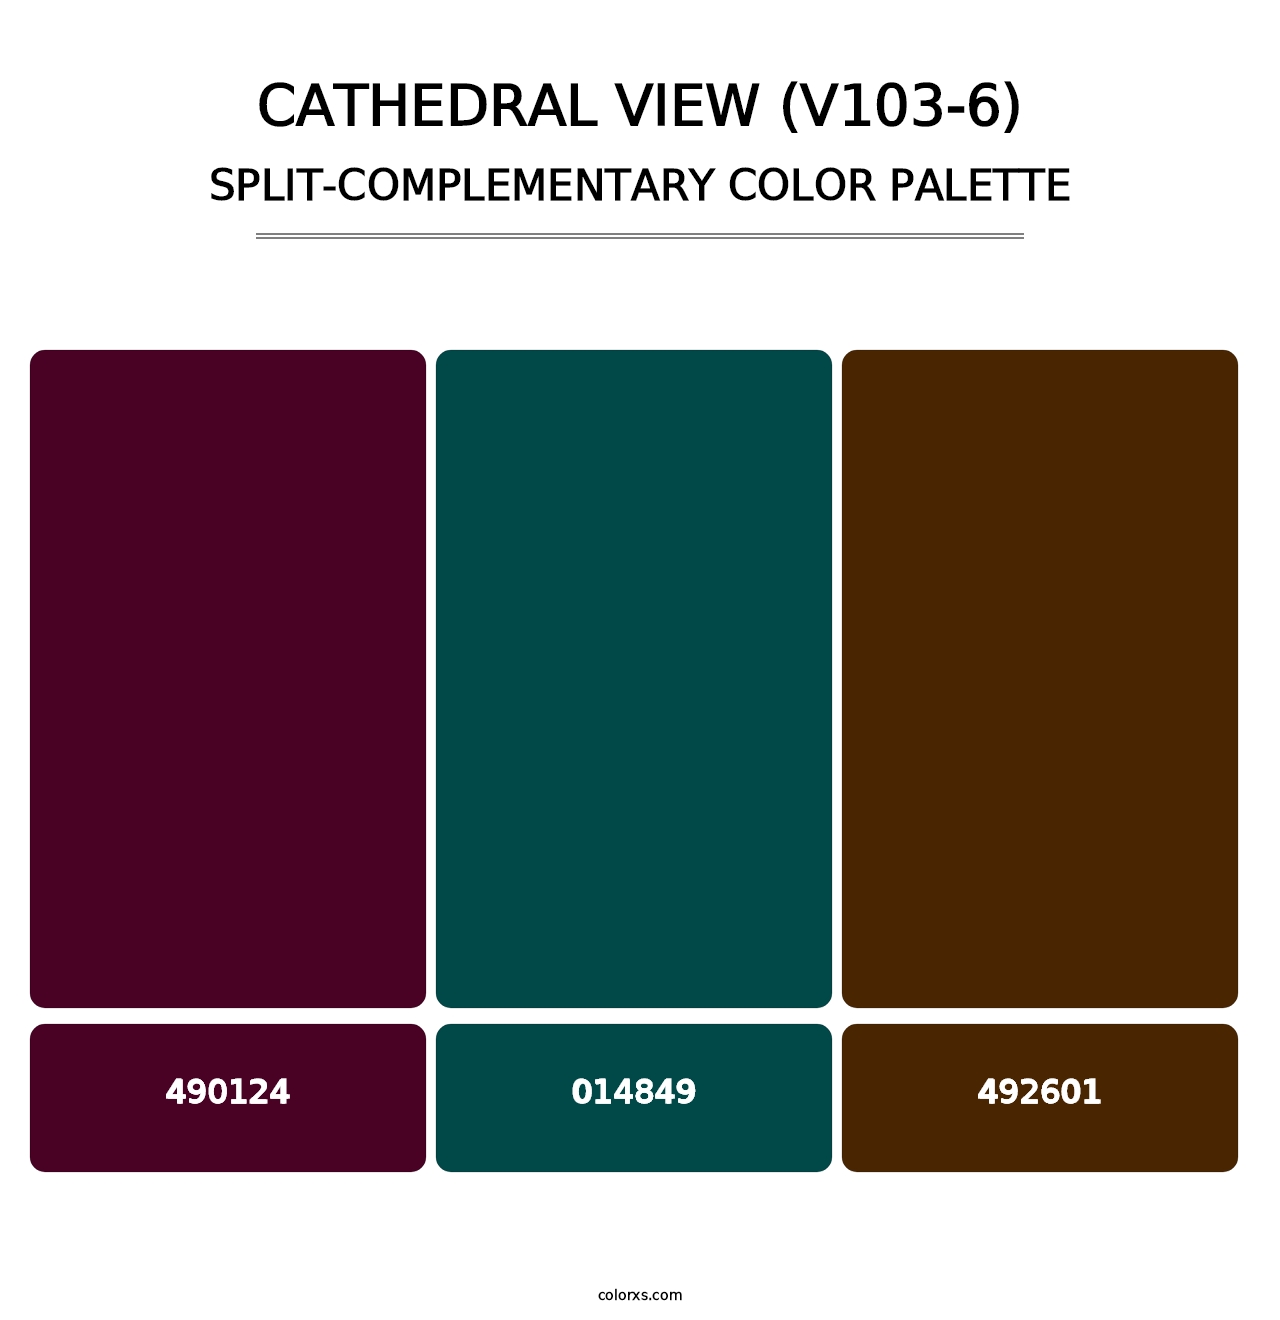 Cathedral View (V103-6) - Split-Complementary Color Palette